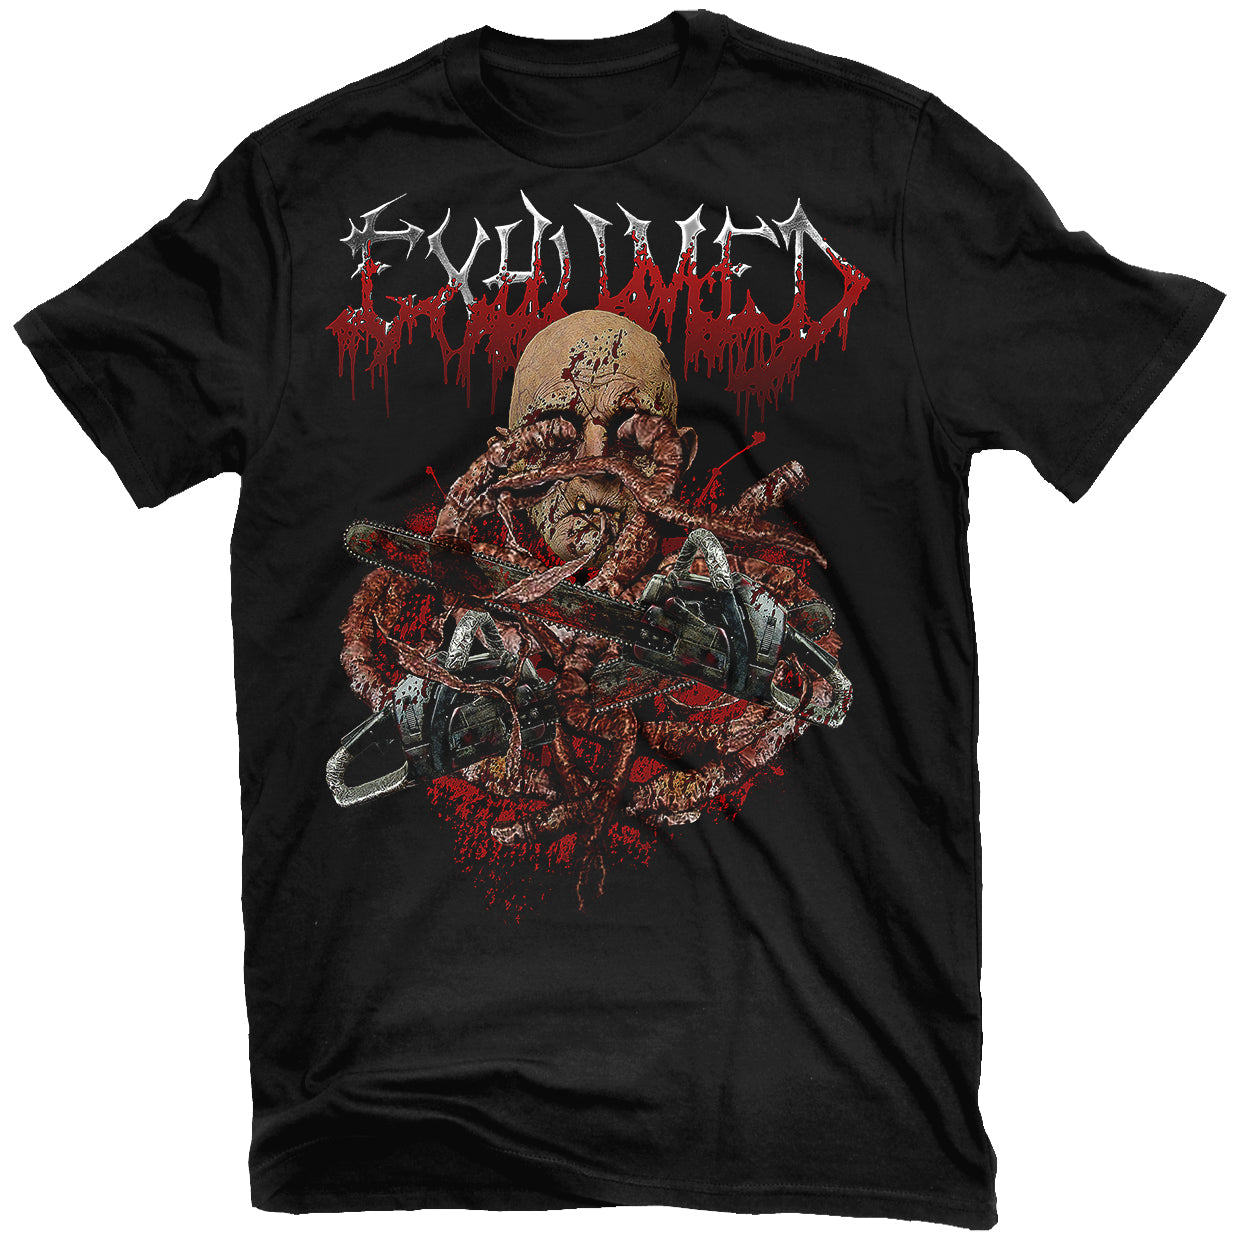 Exhumed "The Saw Remains The Same" T-Shirt